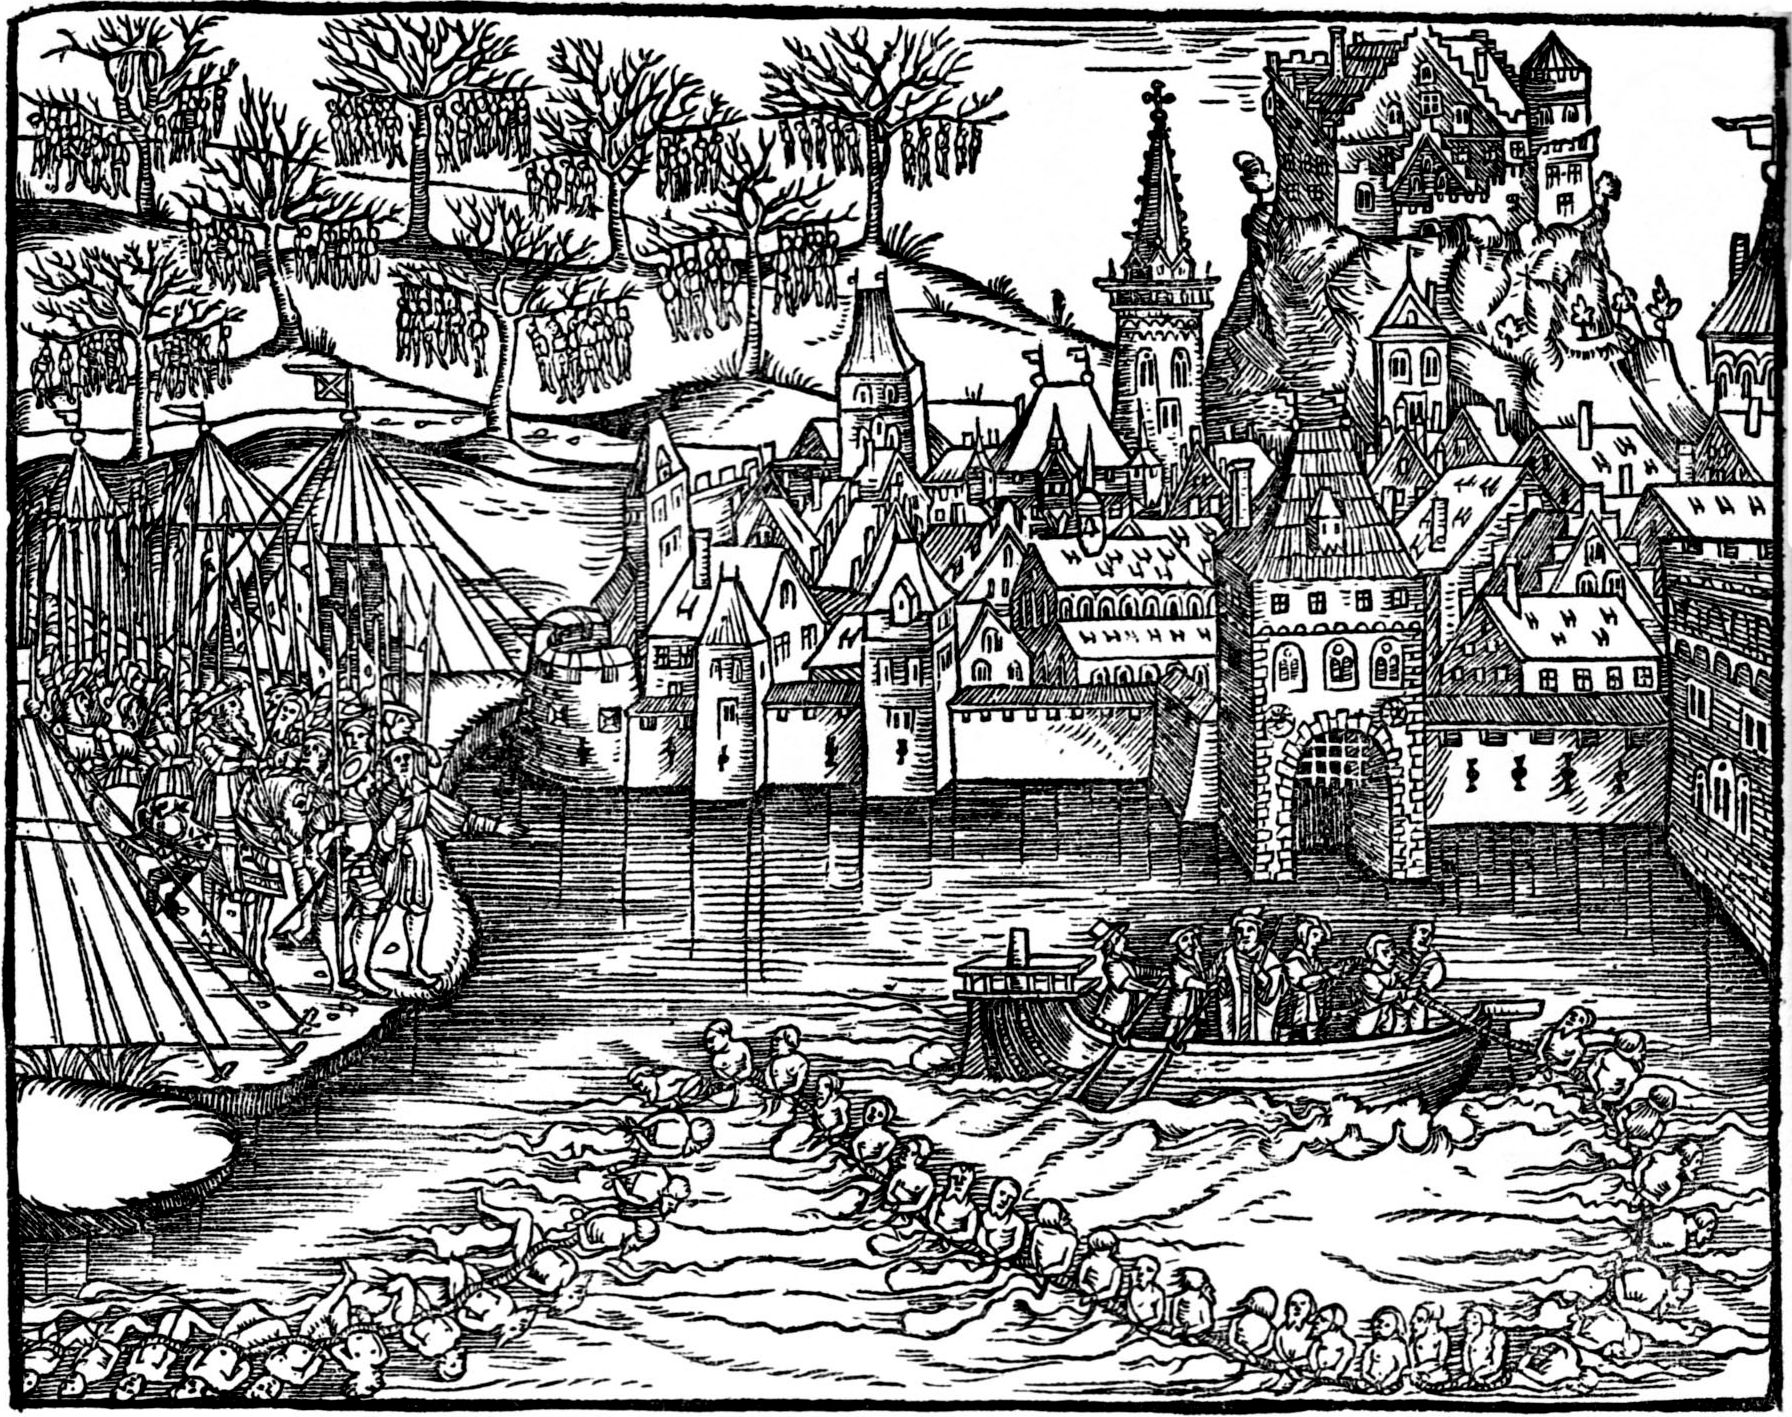 The town of Grandson, originally governed by an ally of Charles, had been brutally taken by the Swiss in 1475. Charles besieged the town in February 1476, and had the Swiss garrison executed after they surrendered by hanging, or drowning in nearby Lake Neuchâtel. 